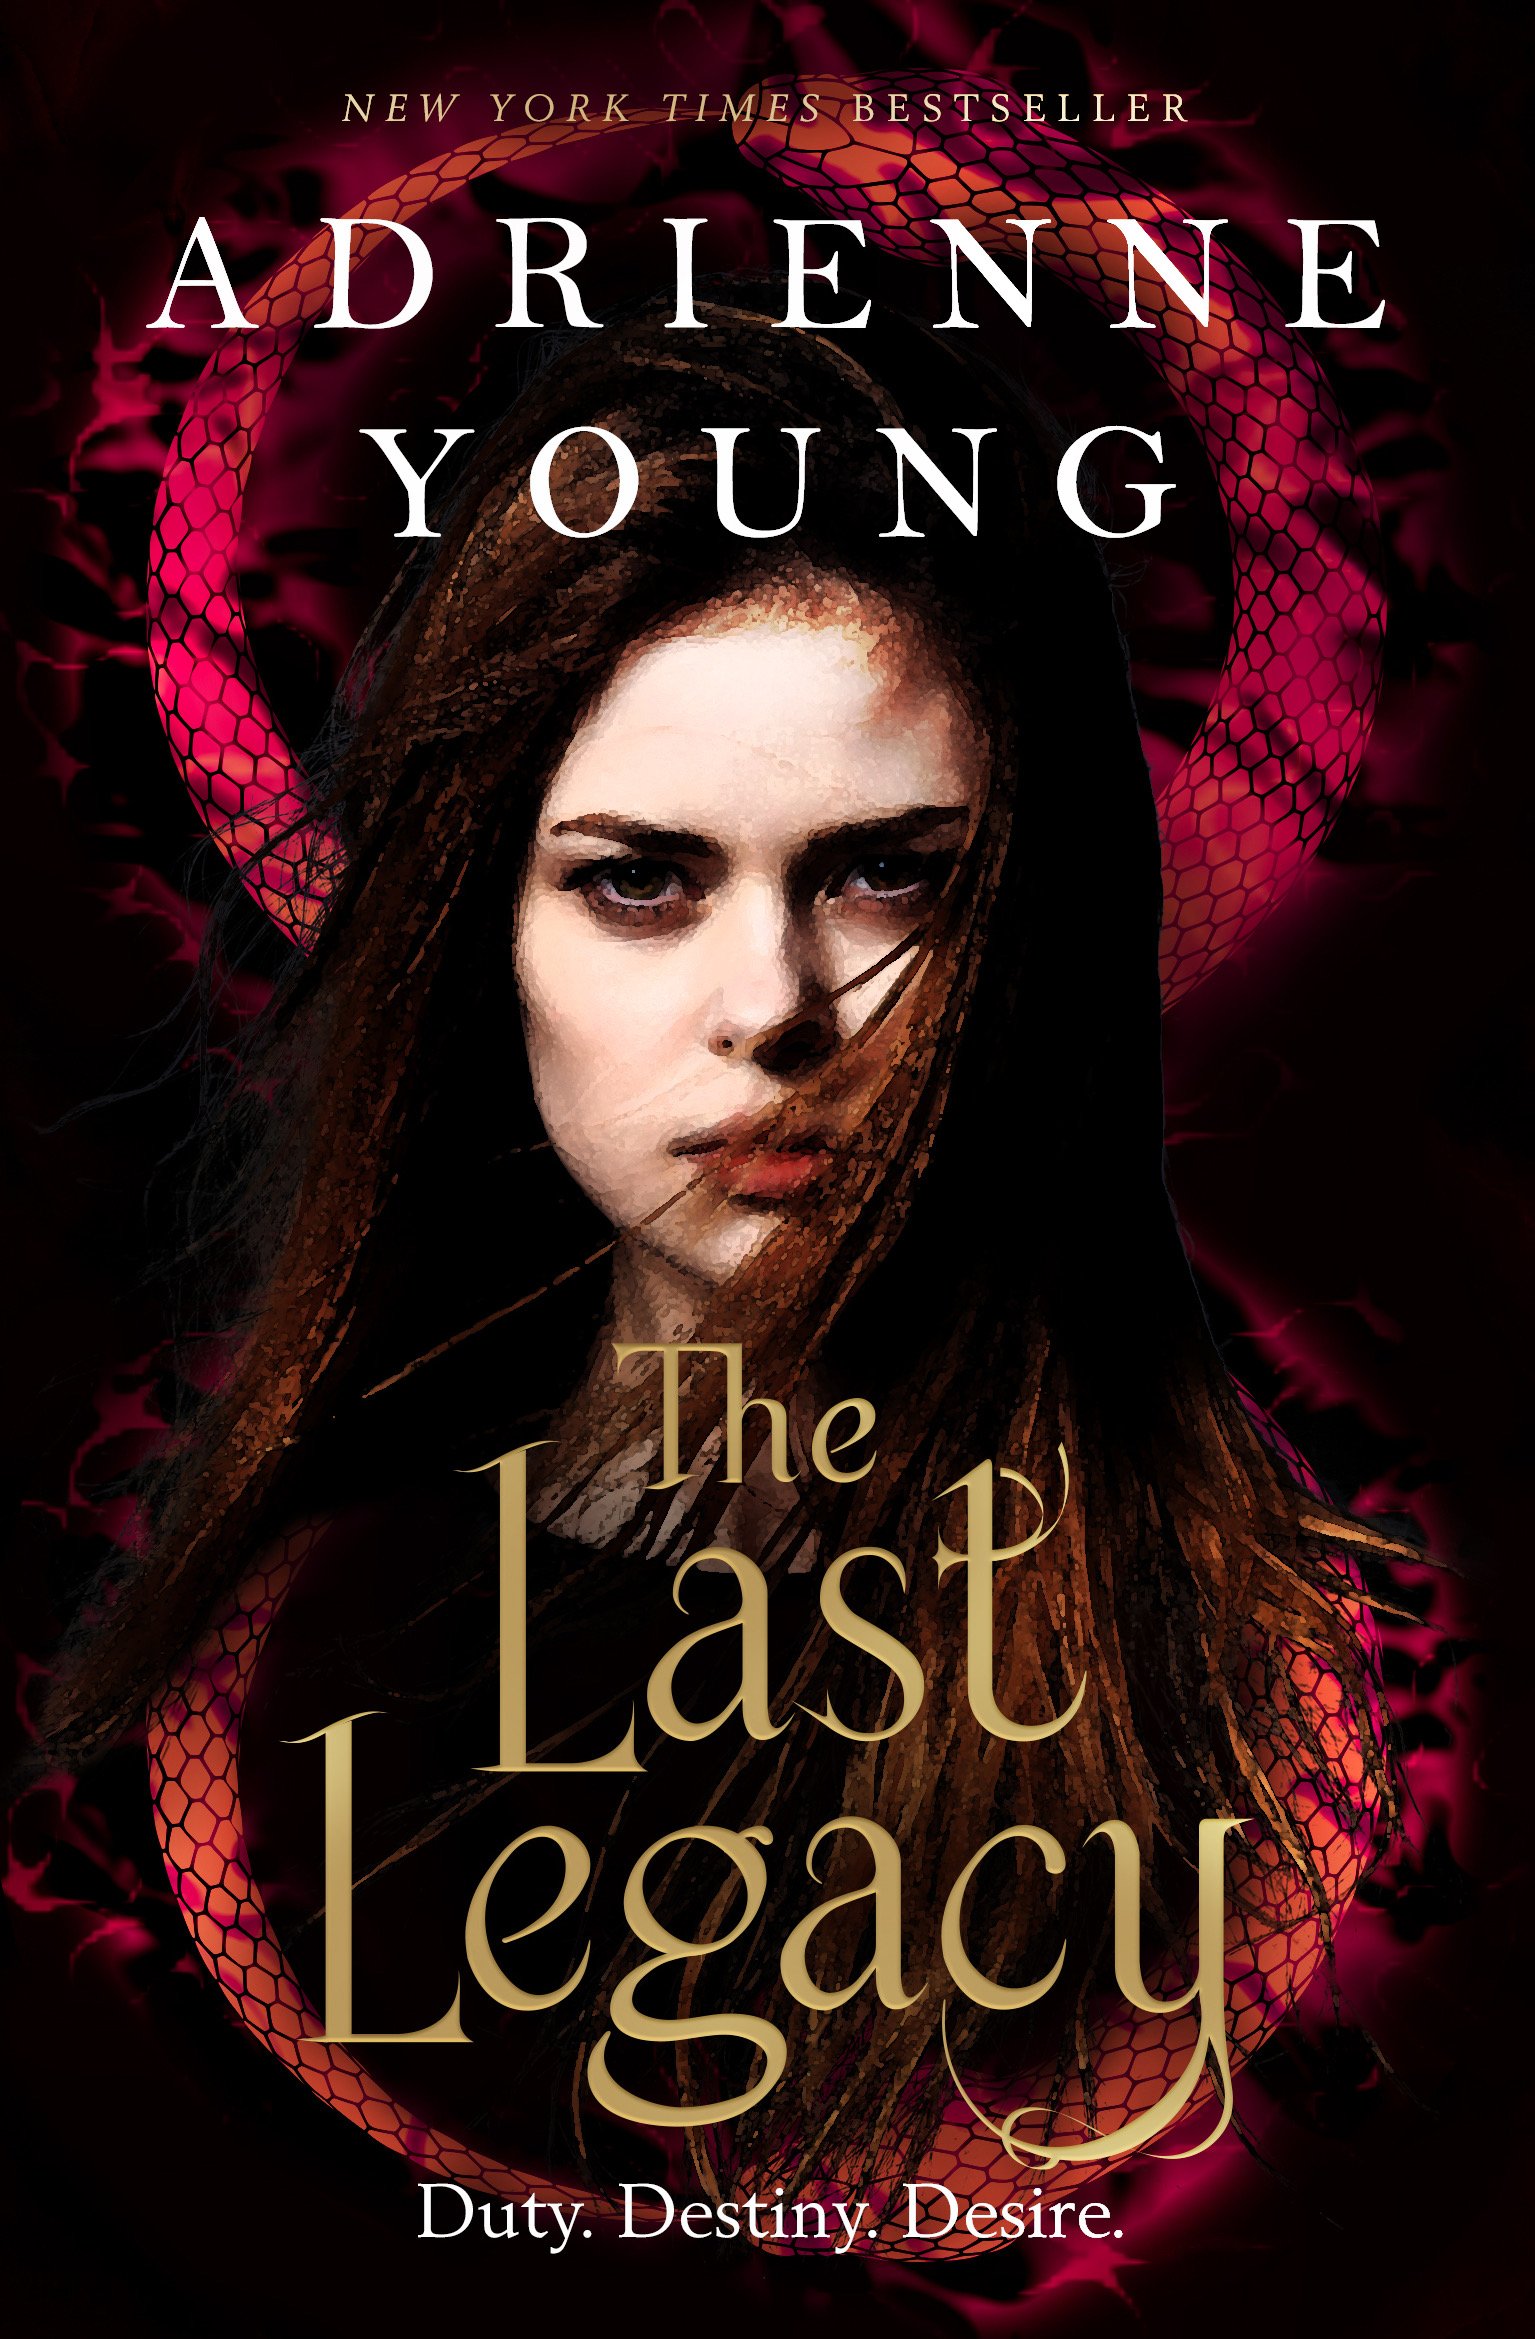 The Last Legacy by Adrienne Young — Runalong The Shelves